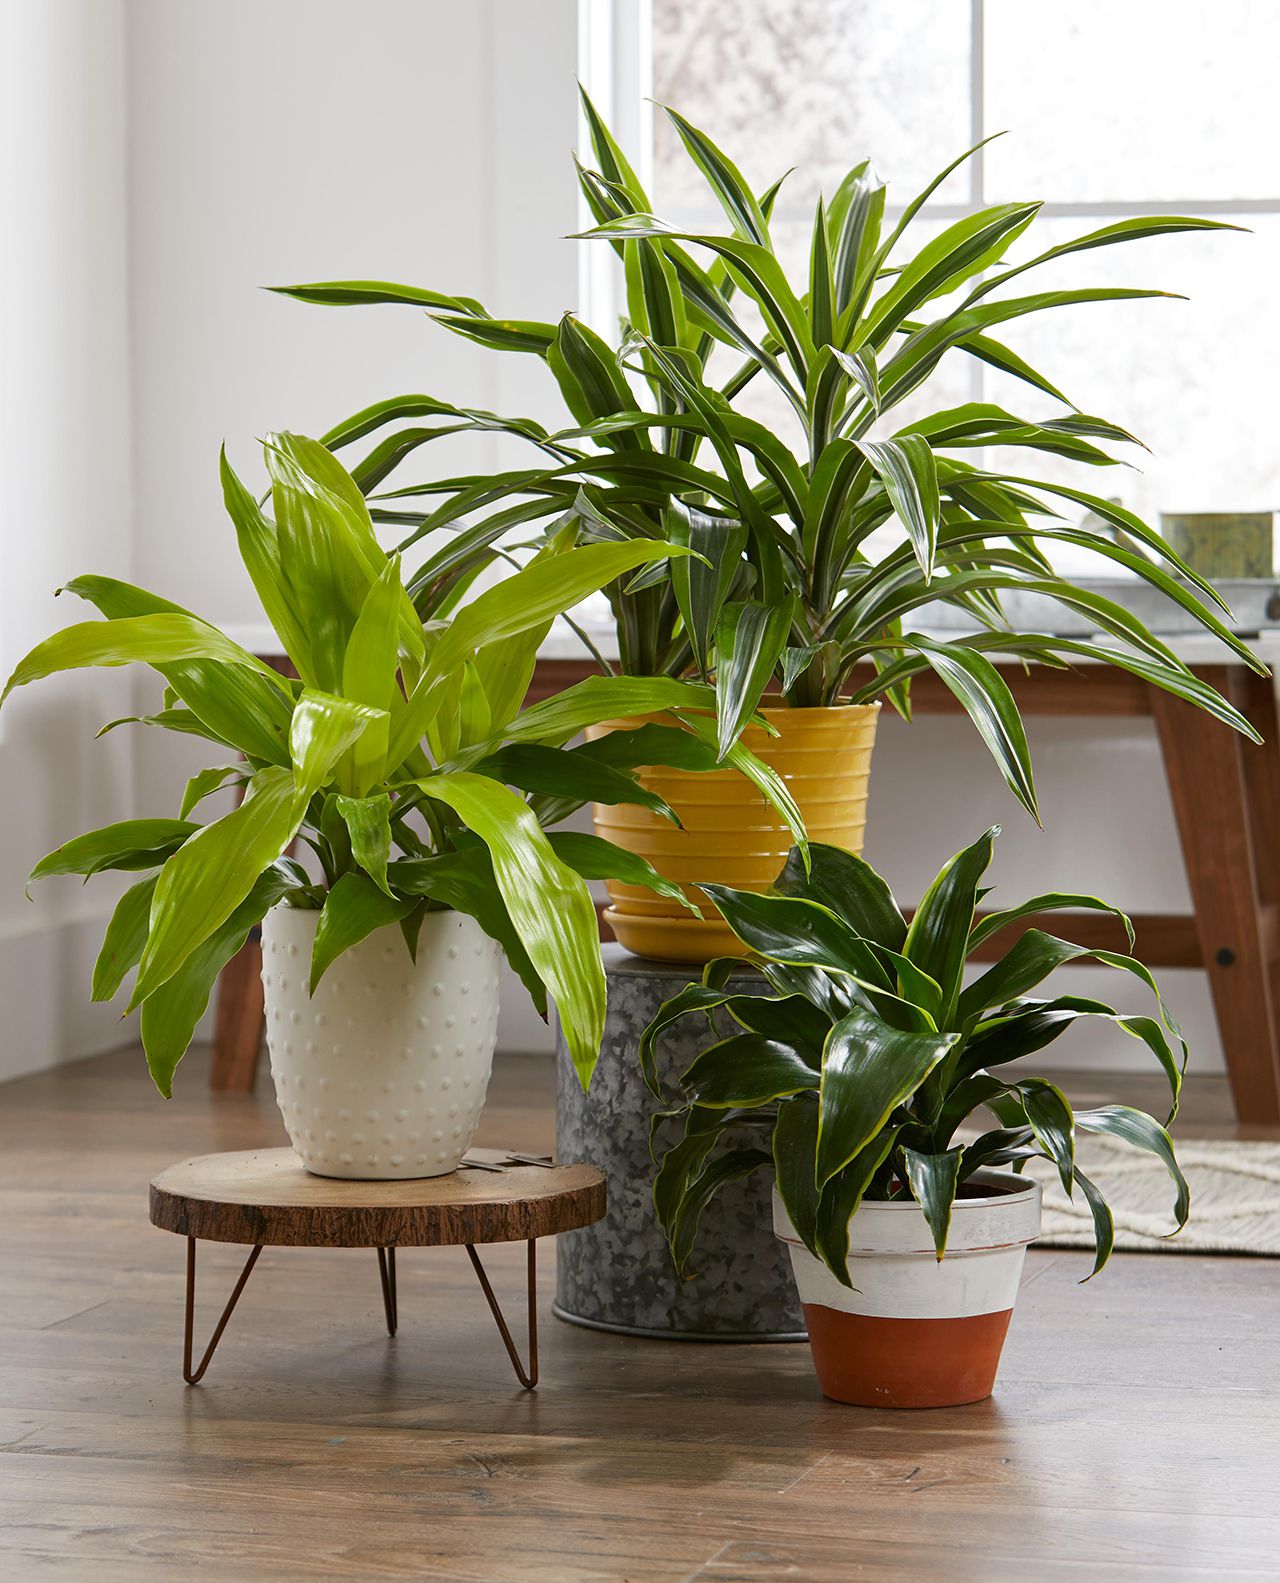 The Beauty of Green Indoor Plants and How They Enhance Your Home Decor